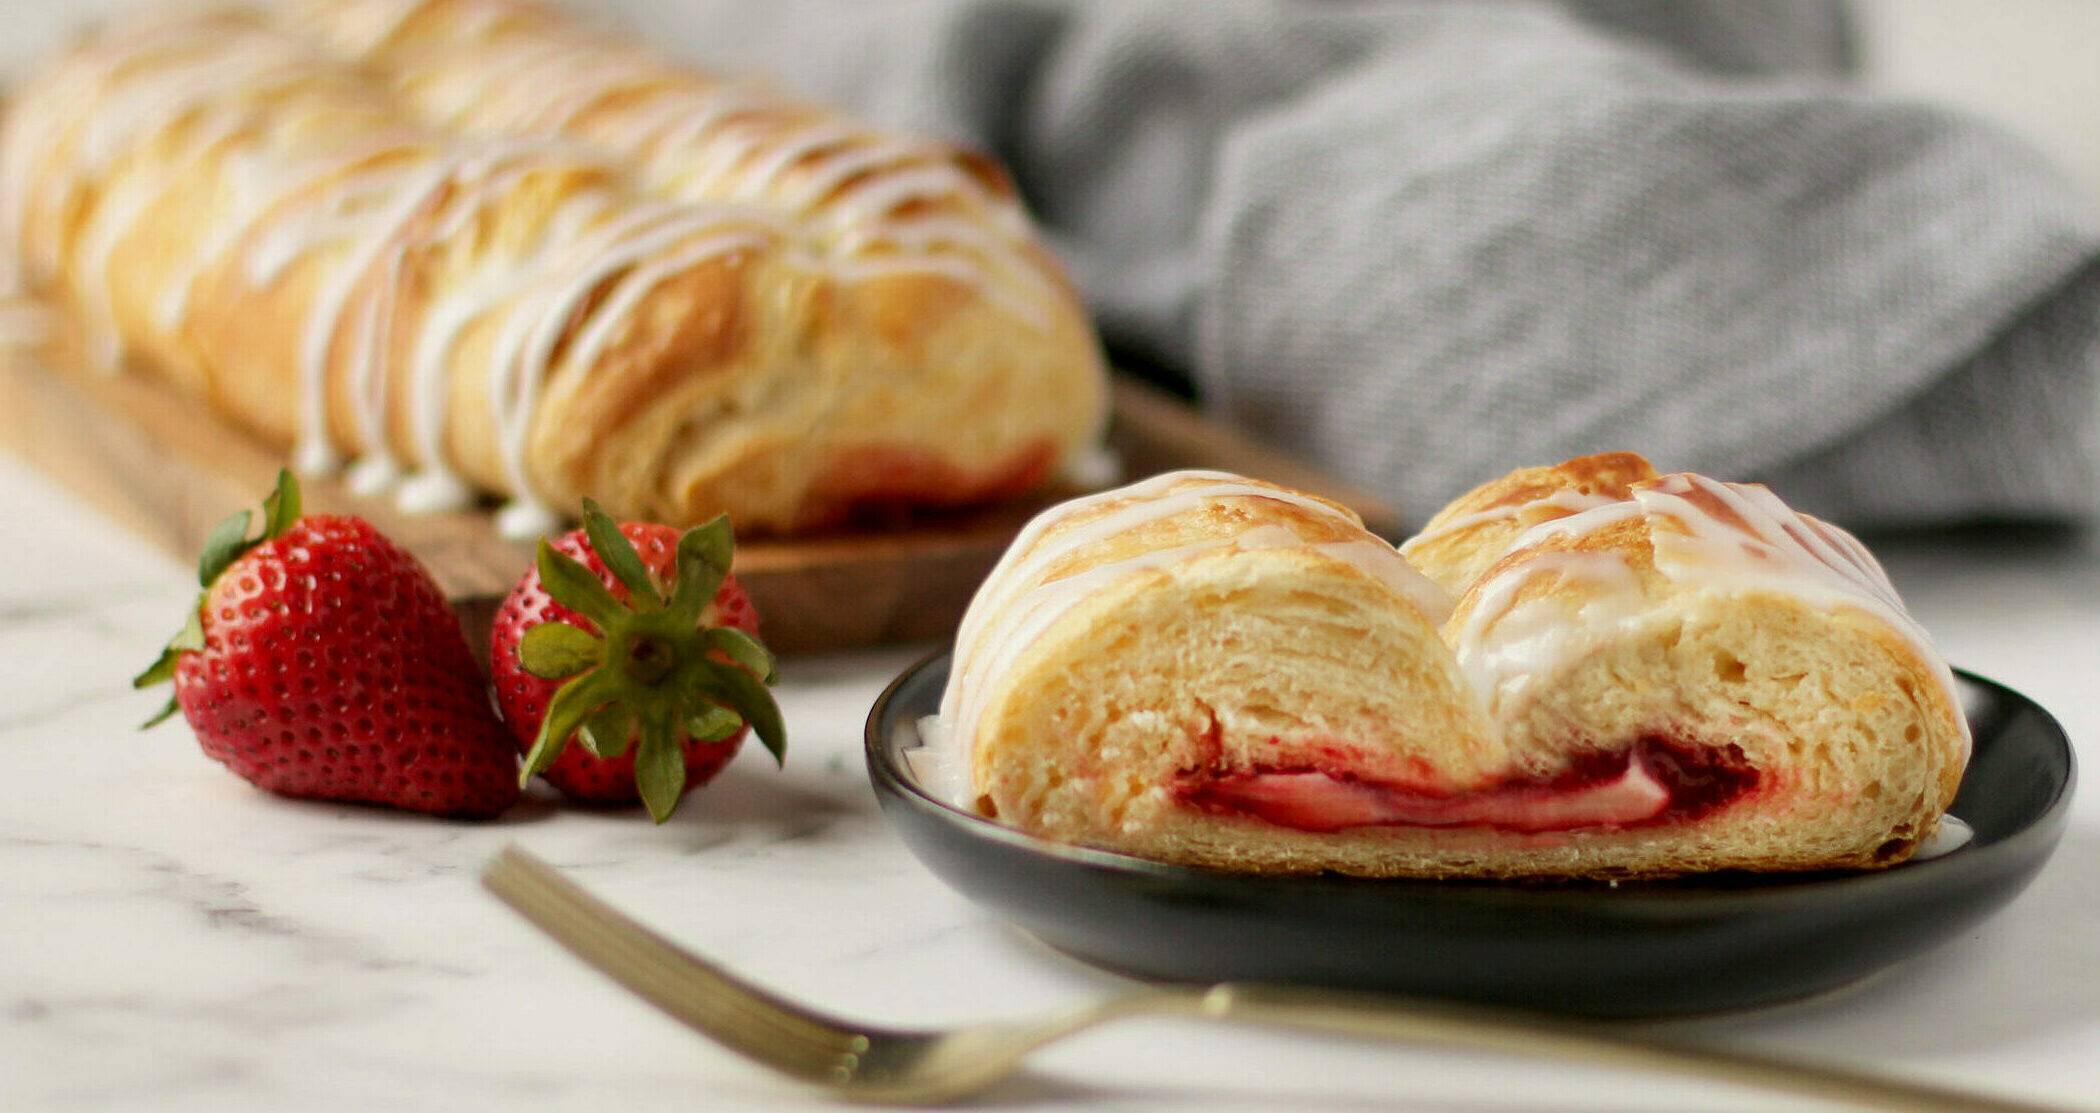 Strawberry Cream Cheese Pastry with icing in the background. A slice of pastry on a plate with fork and strawberries.